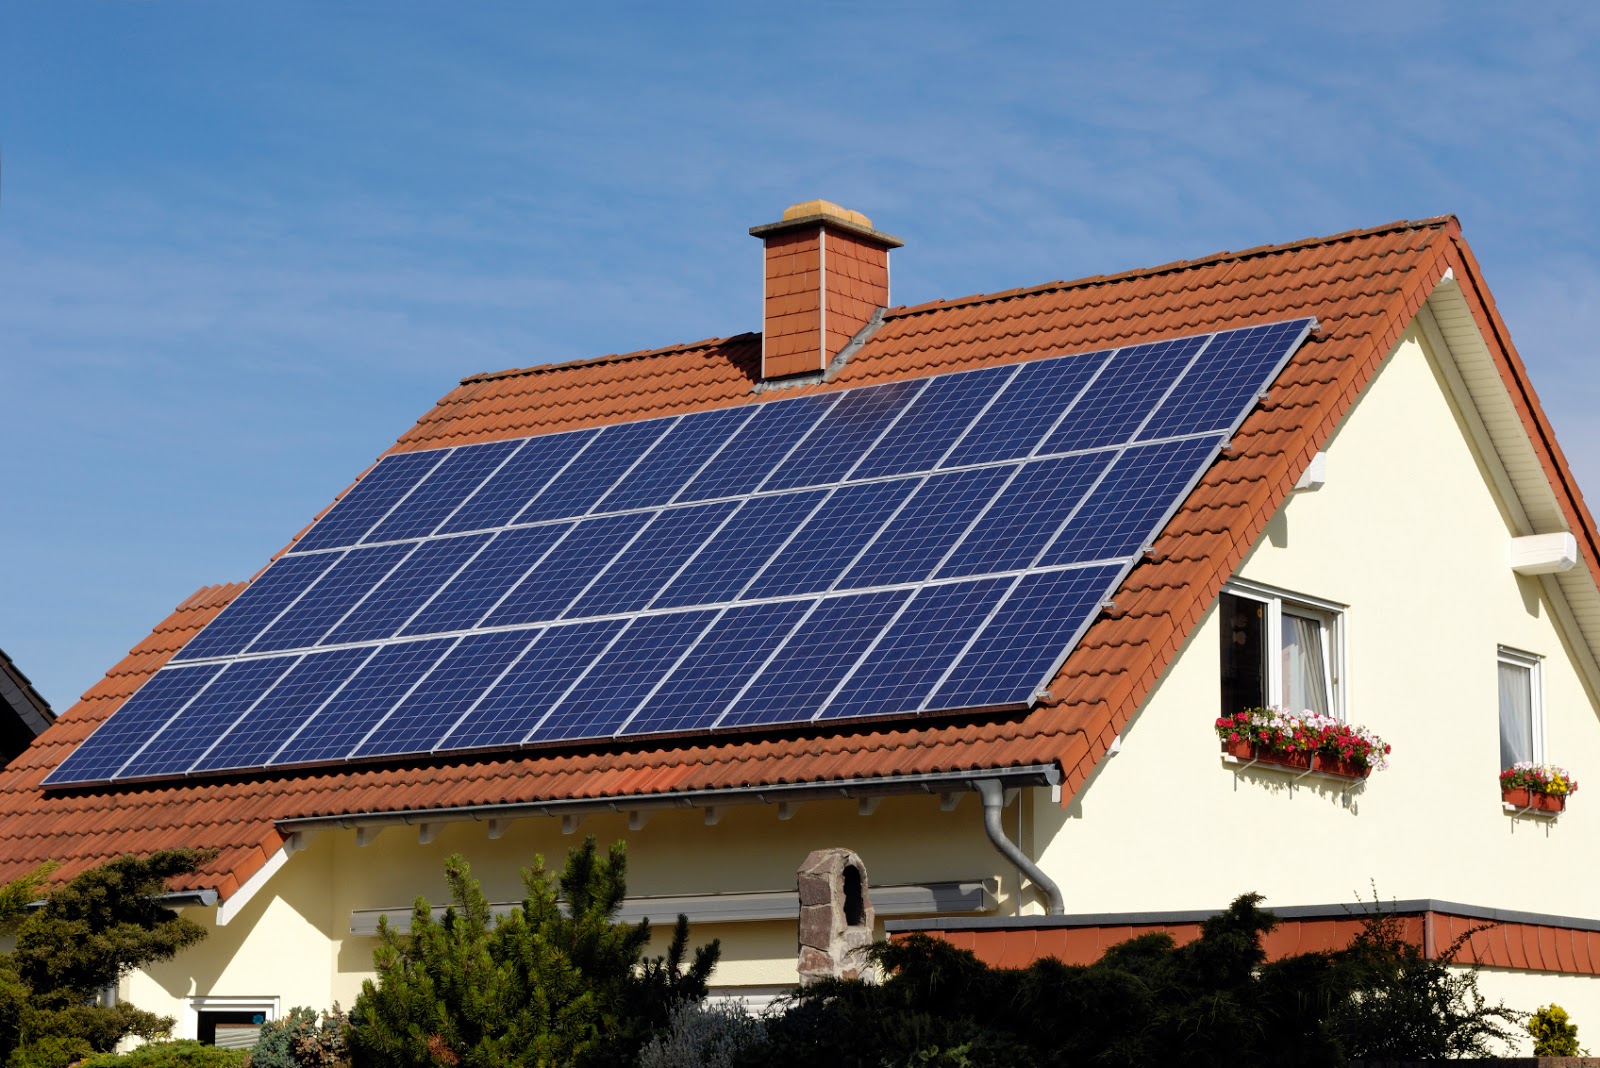 Home Used Solar Panels - People Need To Learn?